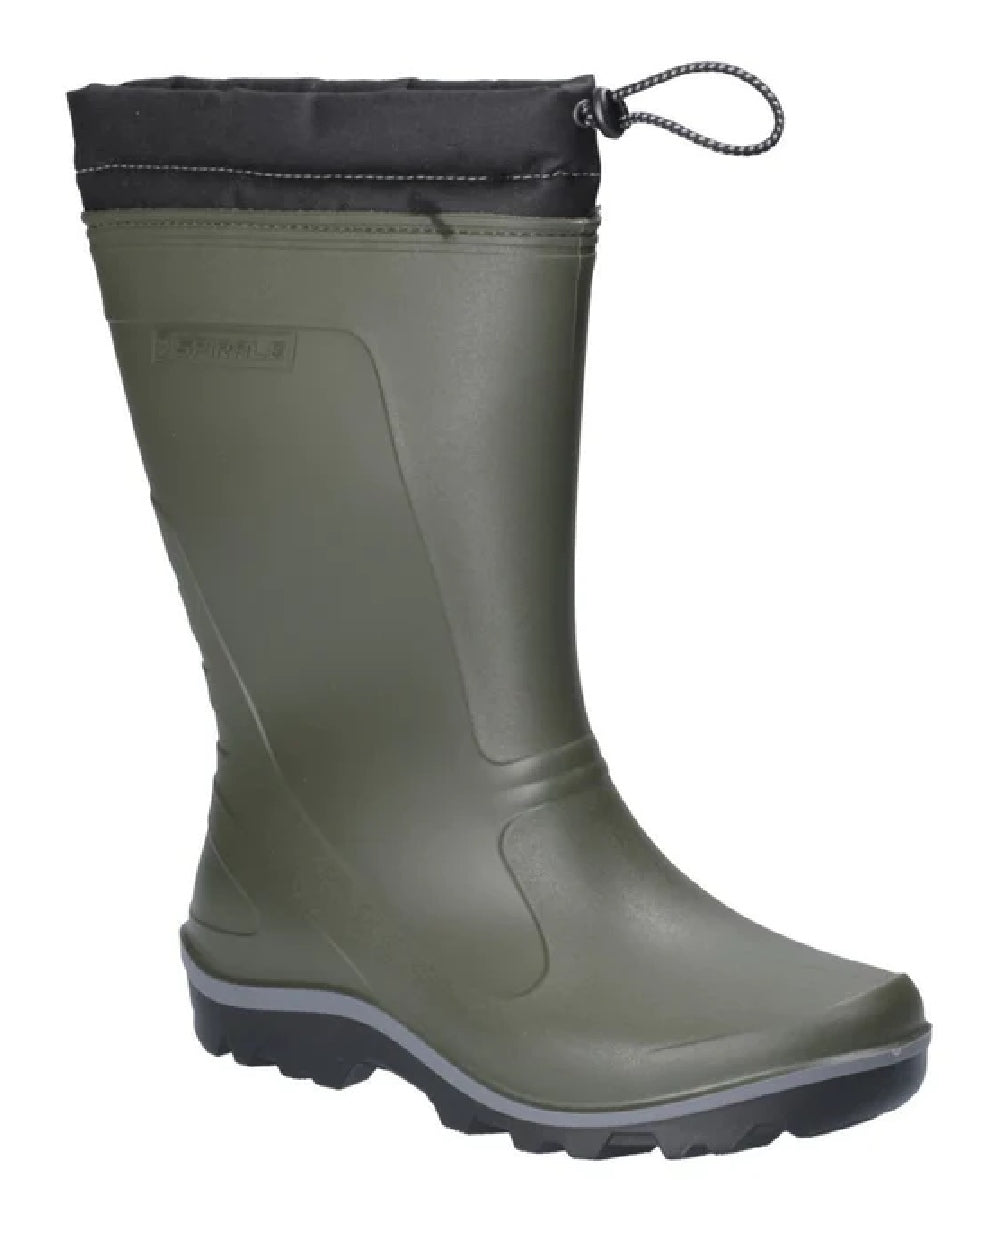 Green coloured Cotswold Minchinhampton Lined Wellington Boots on white background 